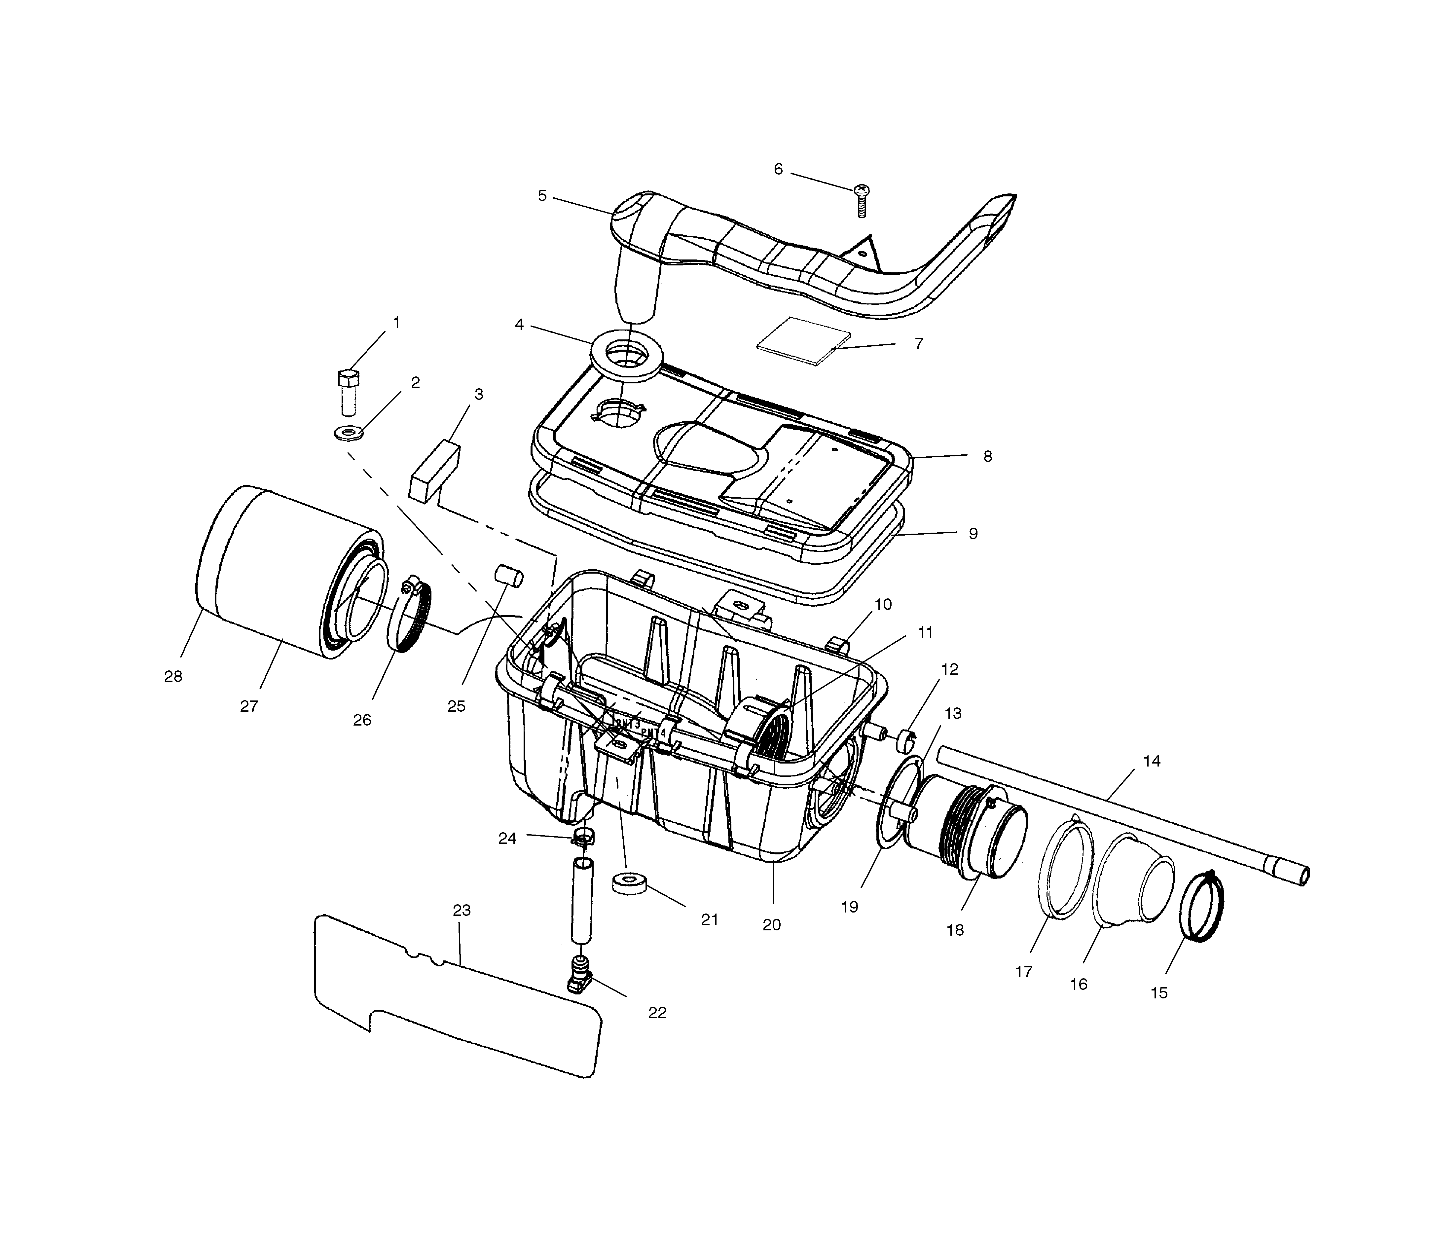 Part Number : 5433769 AIRBOX COVER